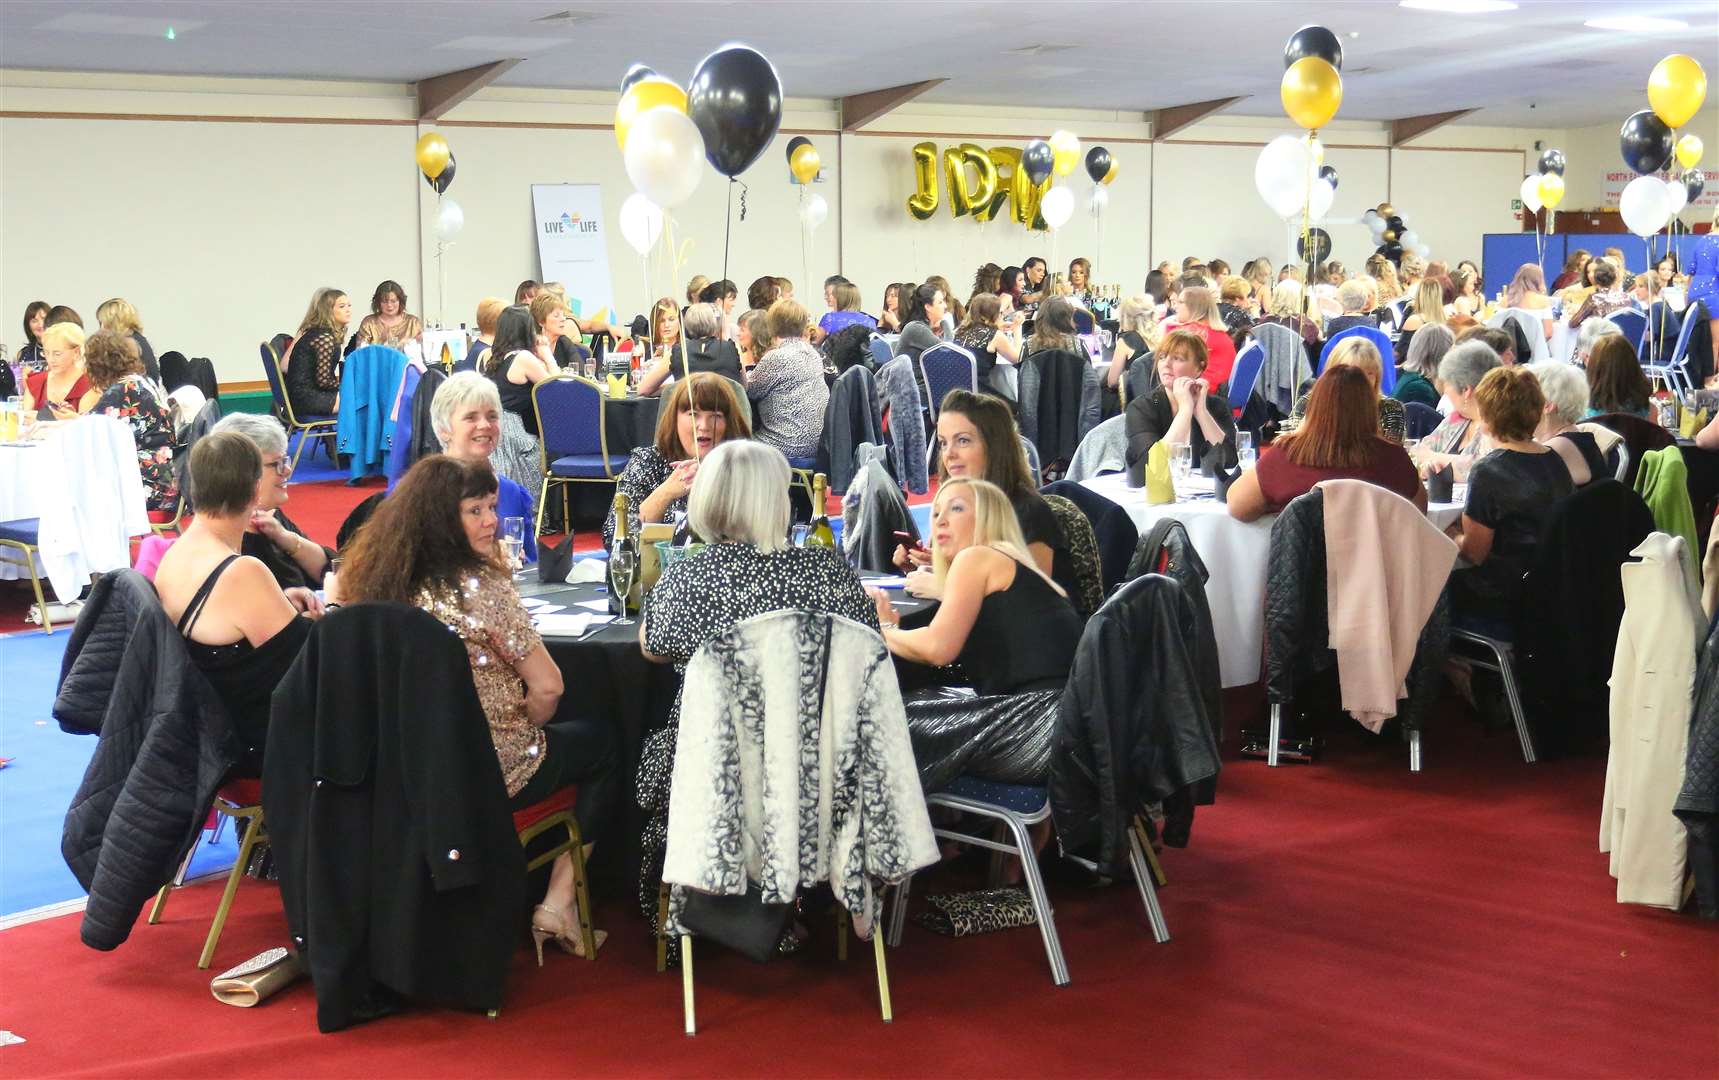 A packed Turriff Bowling Club hosted the Let's Sparkle Ladies Day on behalf of JDRF.